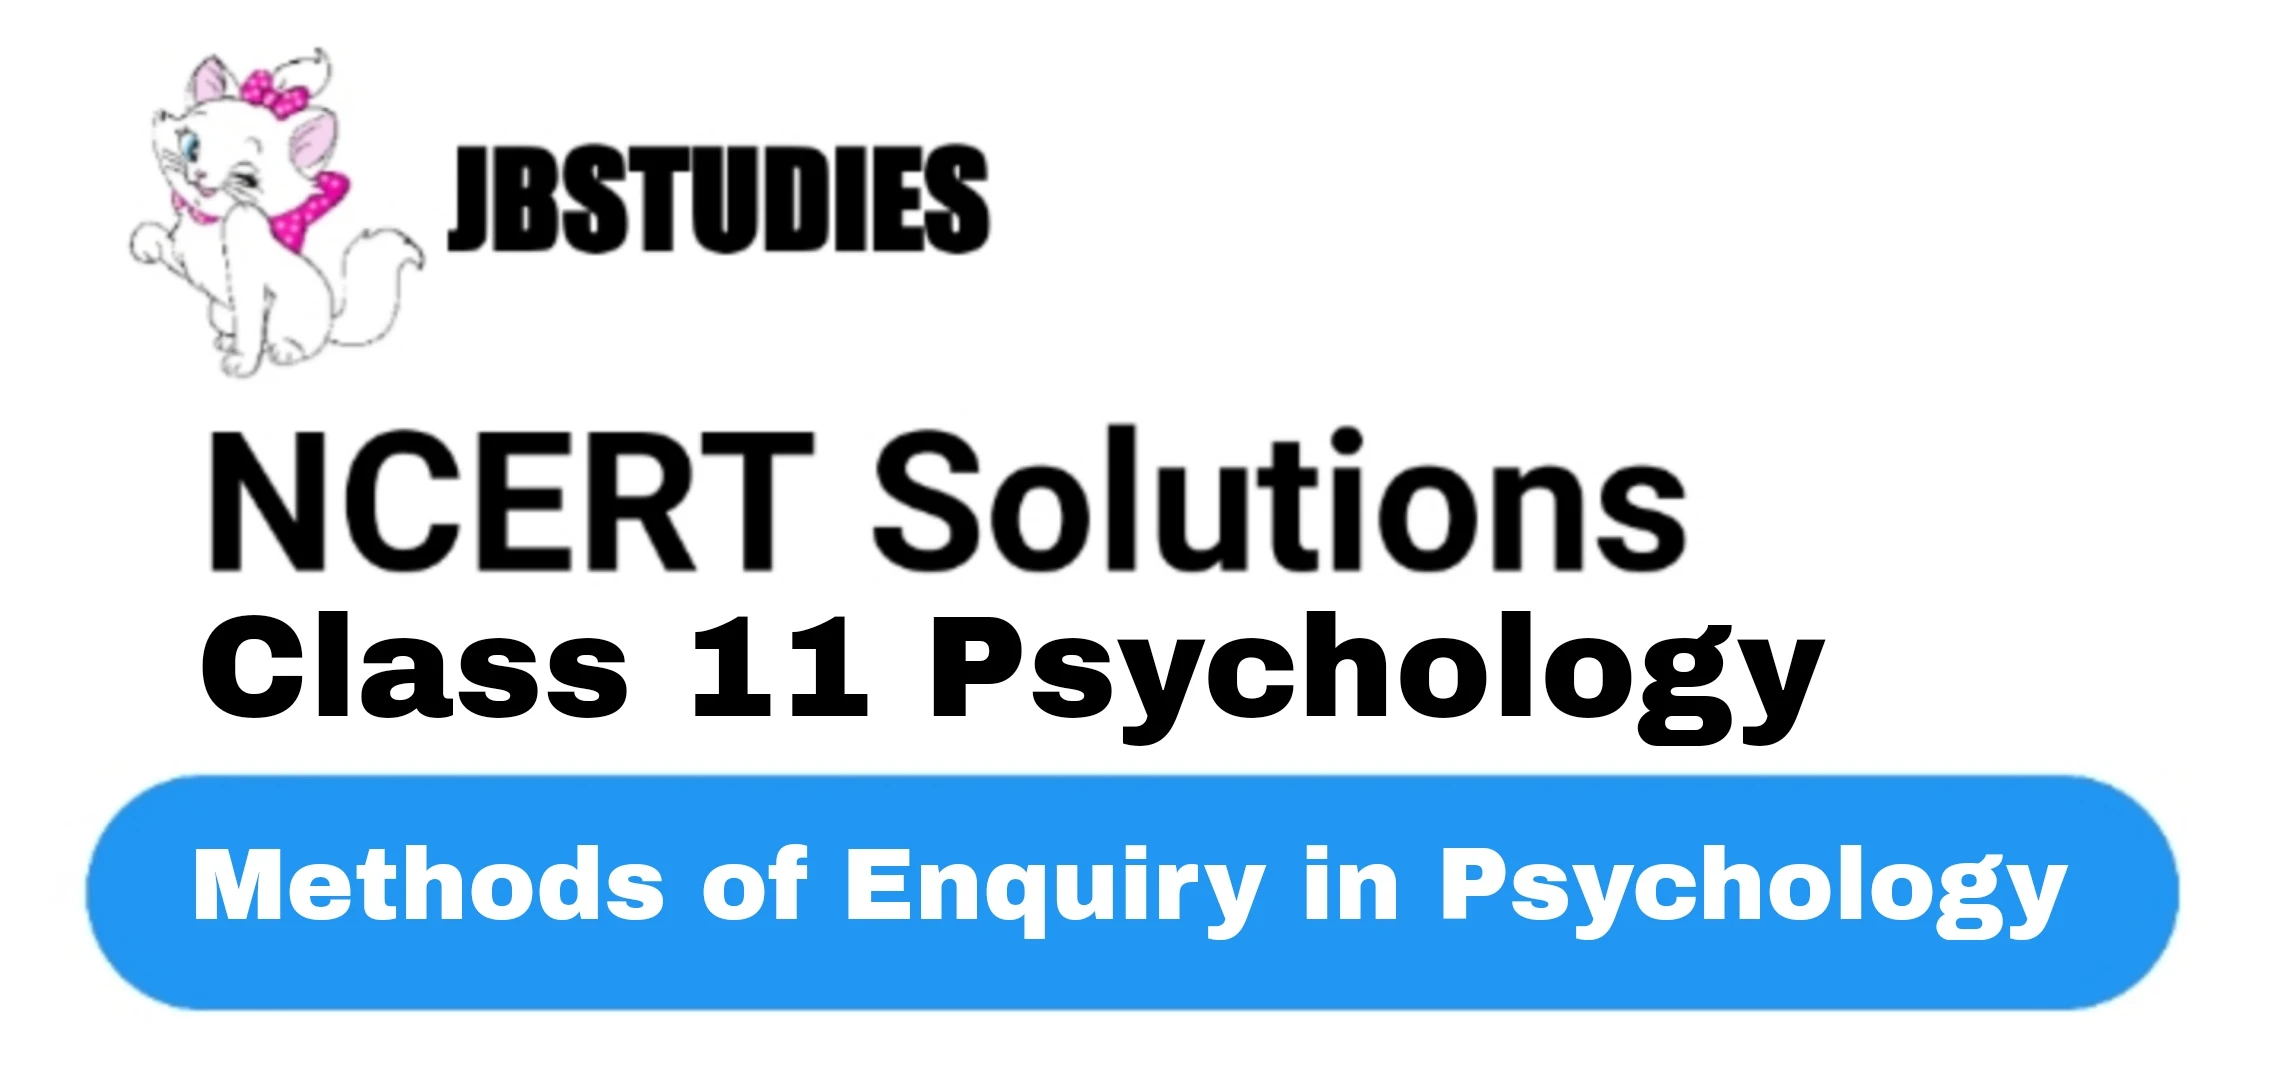 Solutions Class 11 Psychology Chapter -2 (Methods of Enquiry in Psychology)